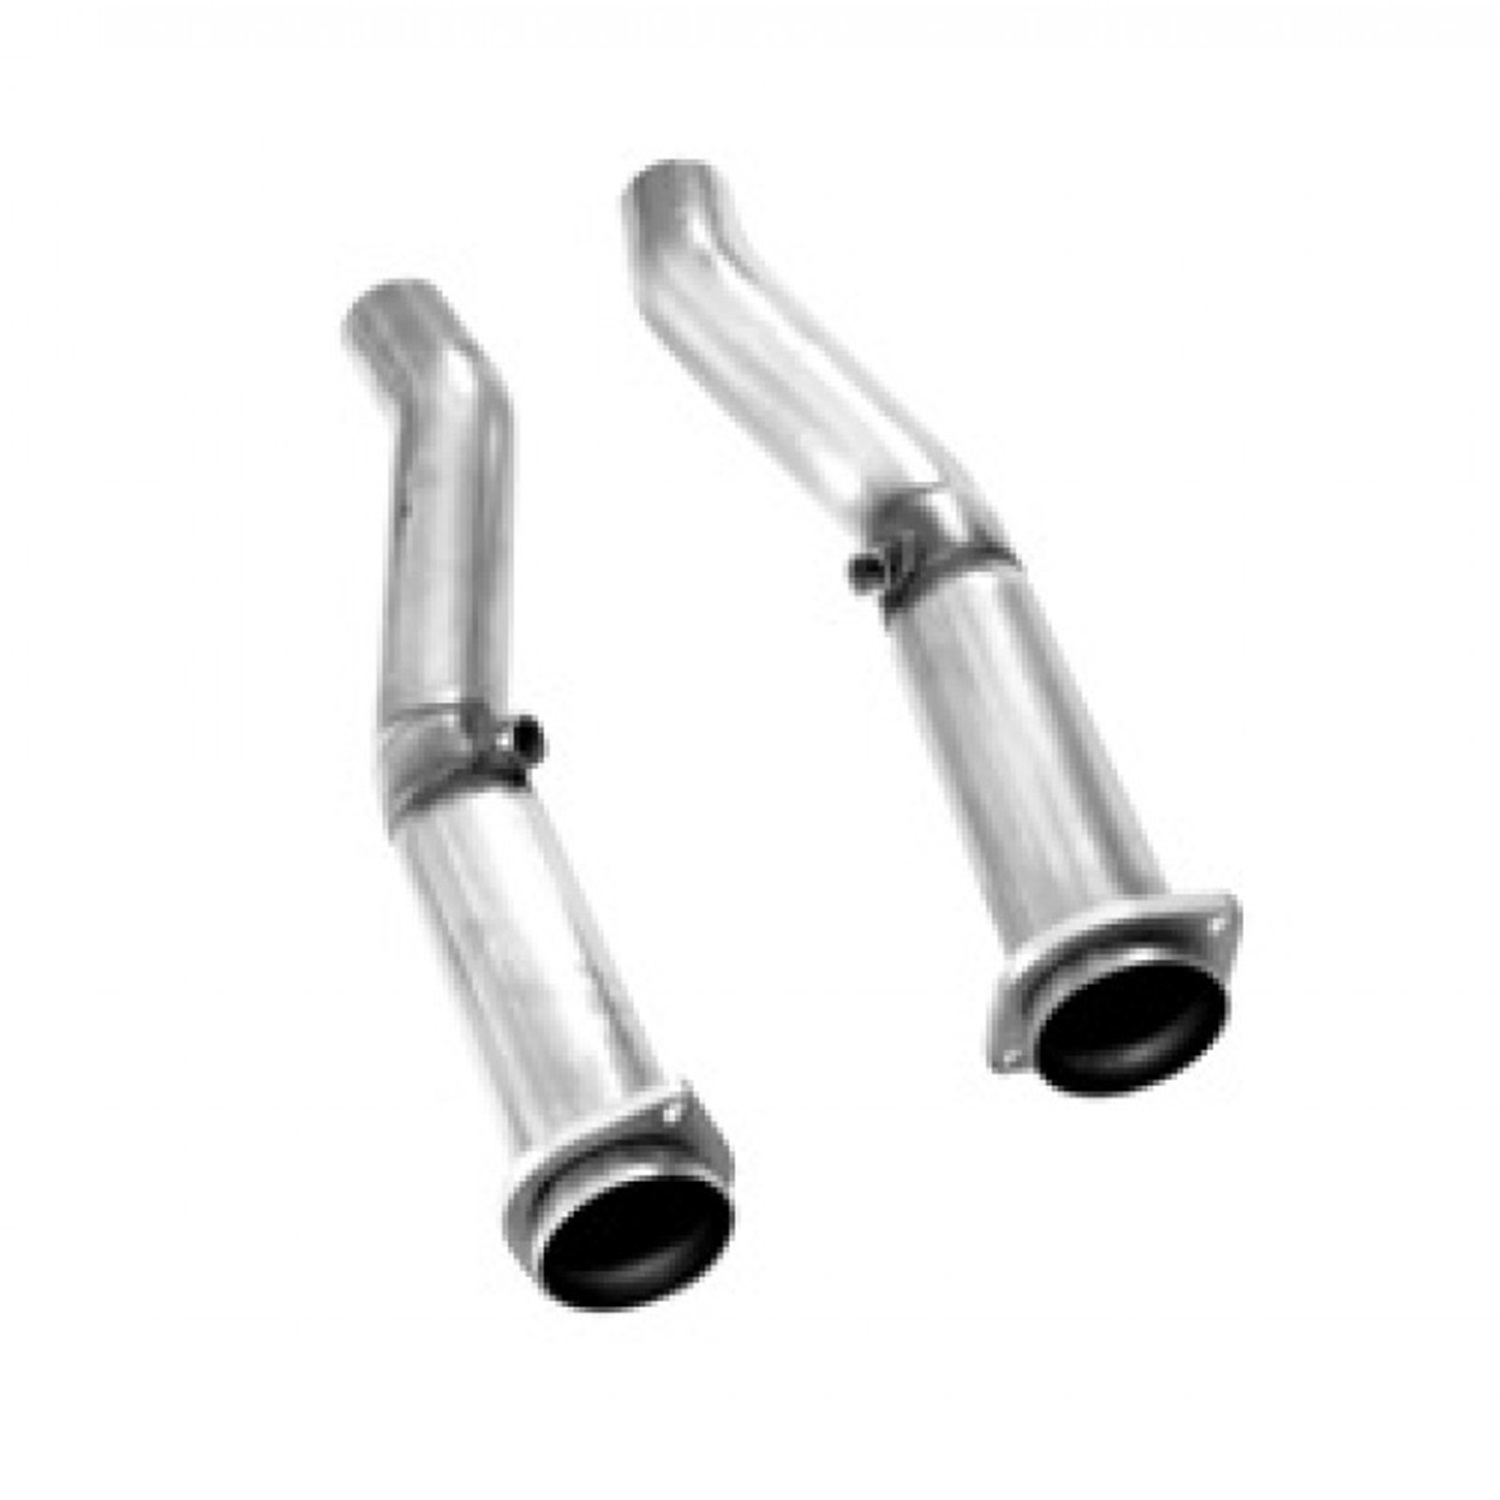 Off Road Connection Pipes 3 x 2.5" OEM Stainless Steel Non Catted Connects To Factory Resonator